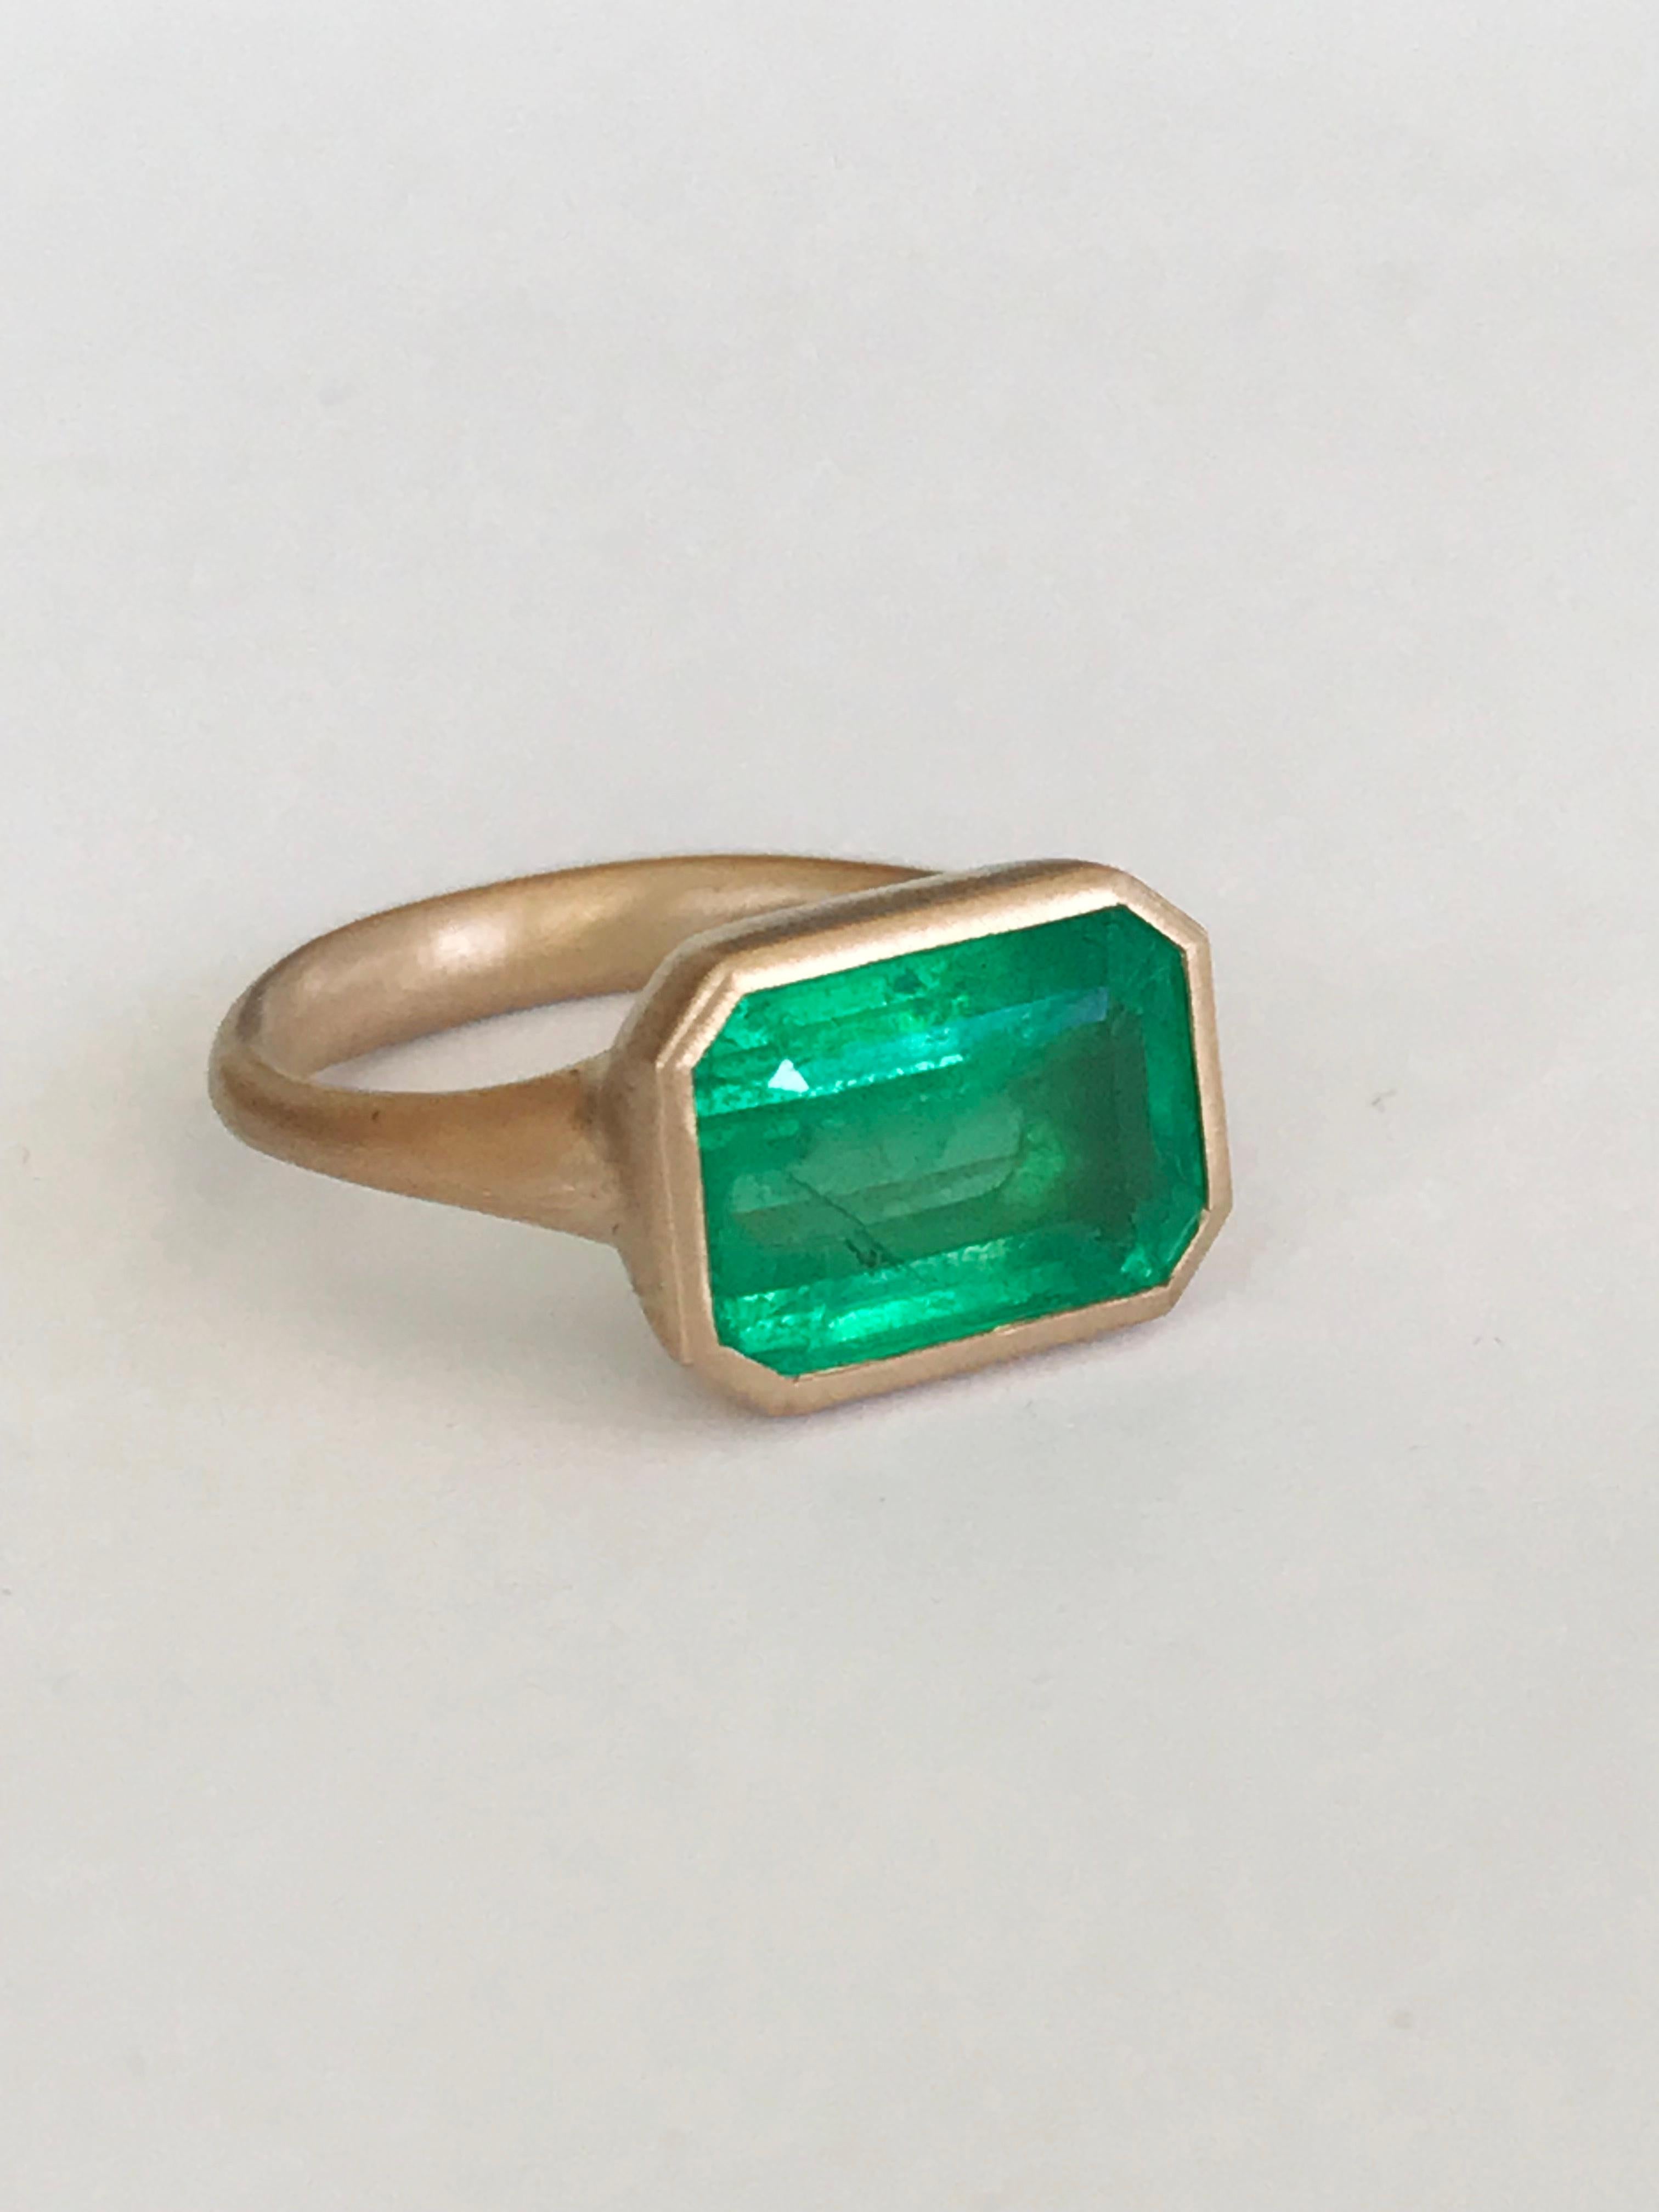 Dalben design One of a Kind 18k rose gold satin finishing ring with a 5,1 carat bezel-set emerald cut emerald. 
Ring size 7 1/4  USA - EU 55 re-sizable to most finger sizes. 
Bezel stone dimensions :
width 13,4 mm
height 10,3 mm
The ring has been